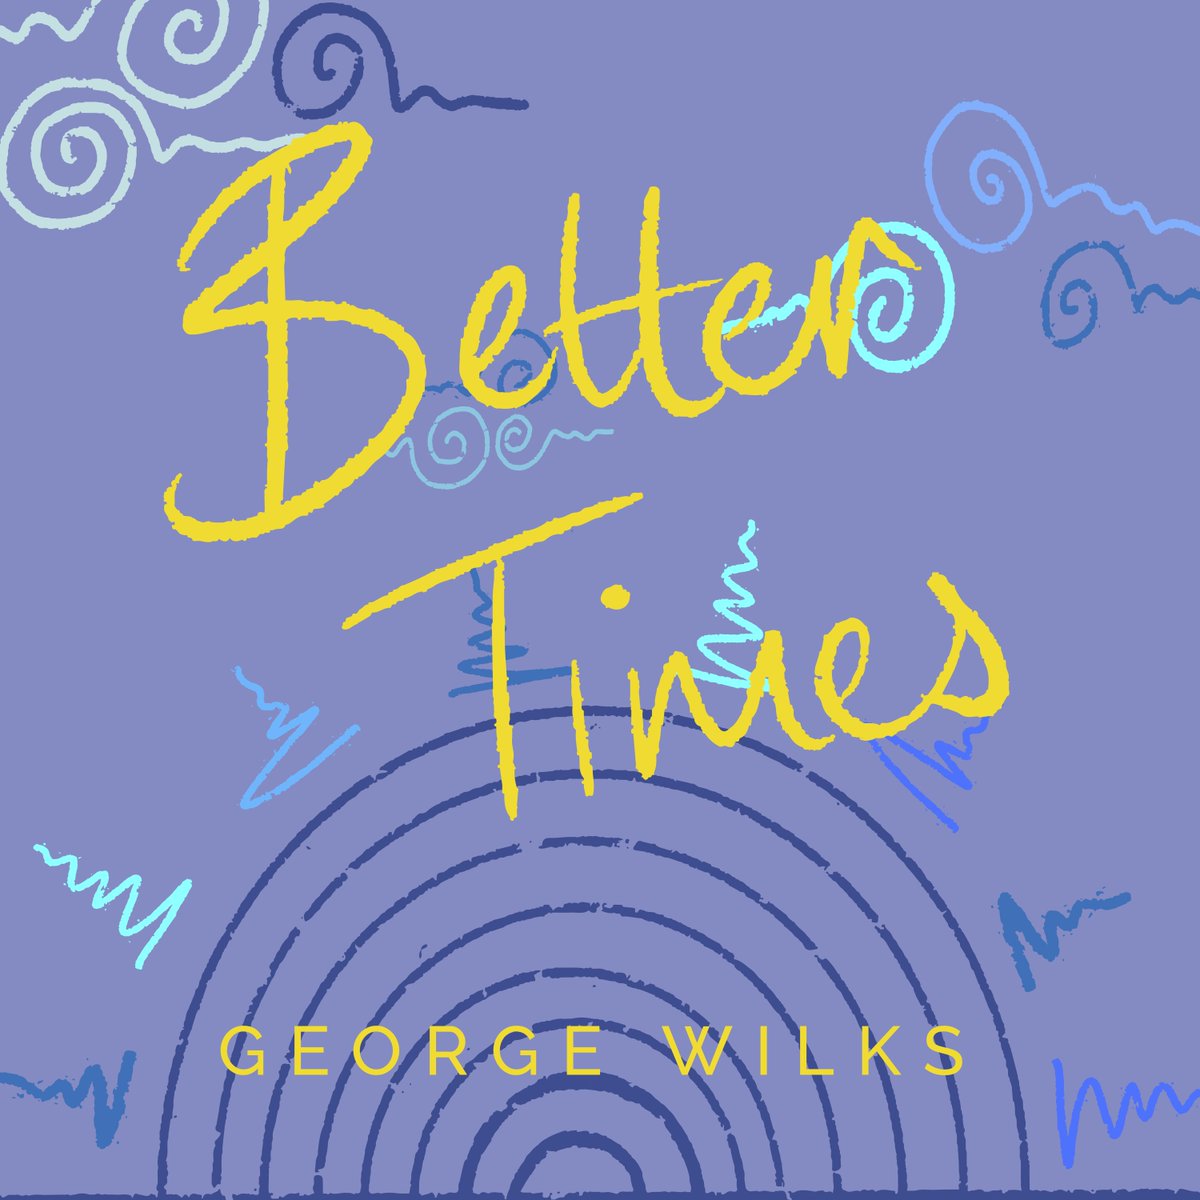 My brand new single 'Better Times' is now available on @Spotify @AppleMusic @SoundCloud @YouTube and many more streaming services! Please go check it out ⬇️ would make me v happy 😁🎉 open.spotify.com/album/5t2yi5zq…